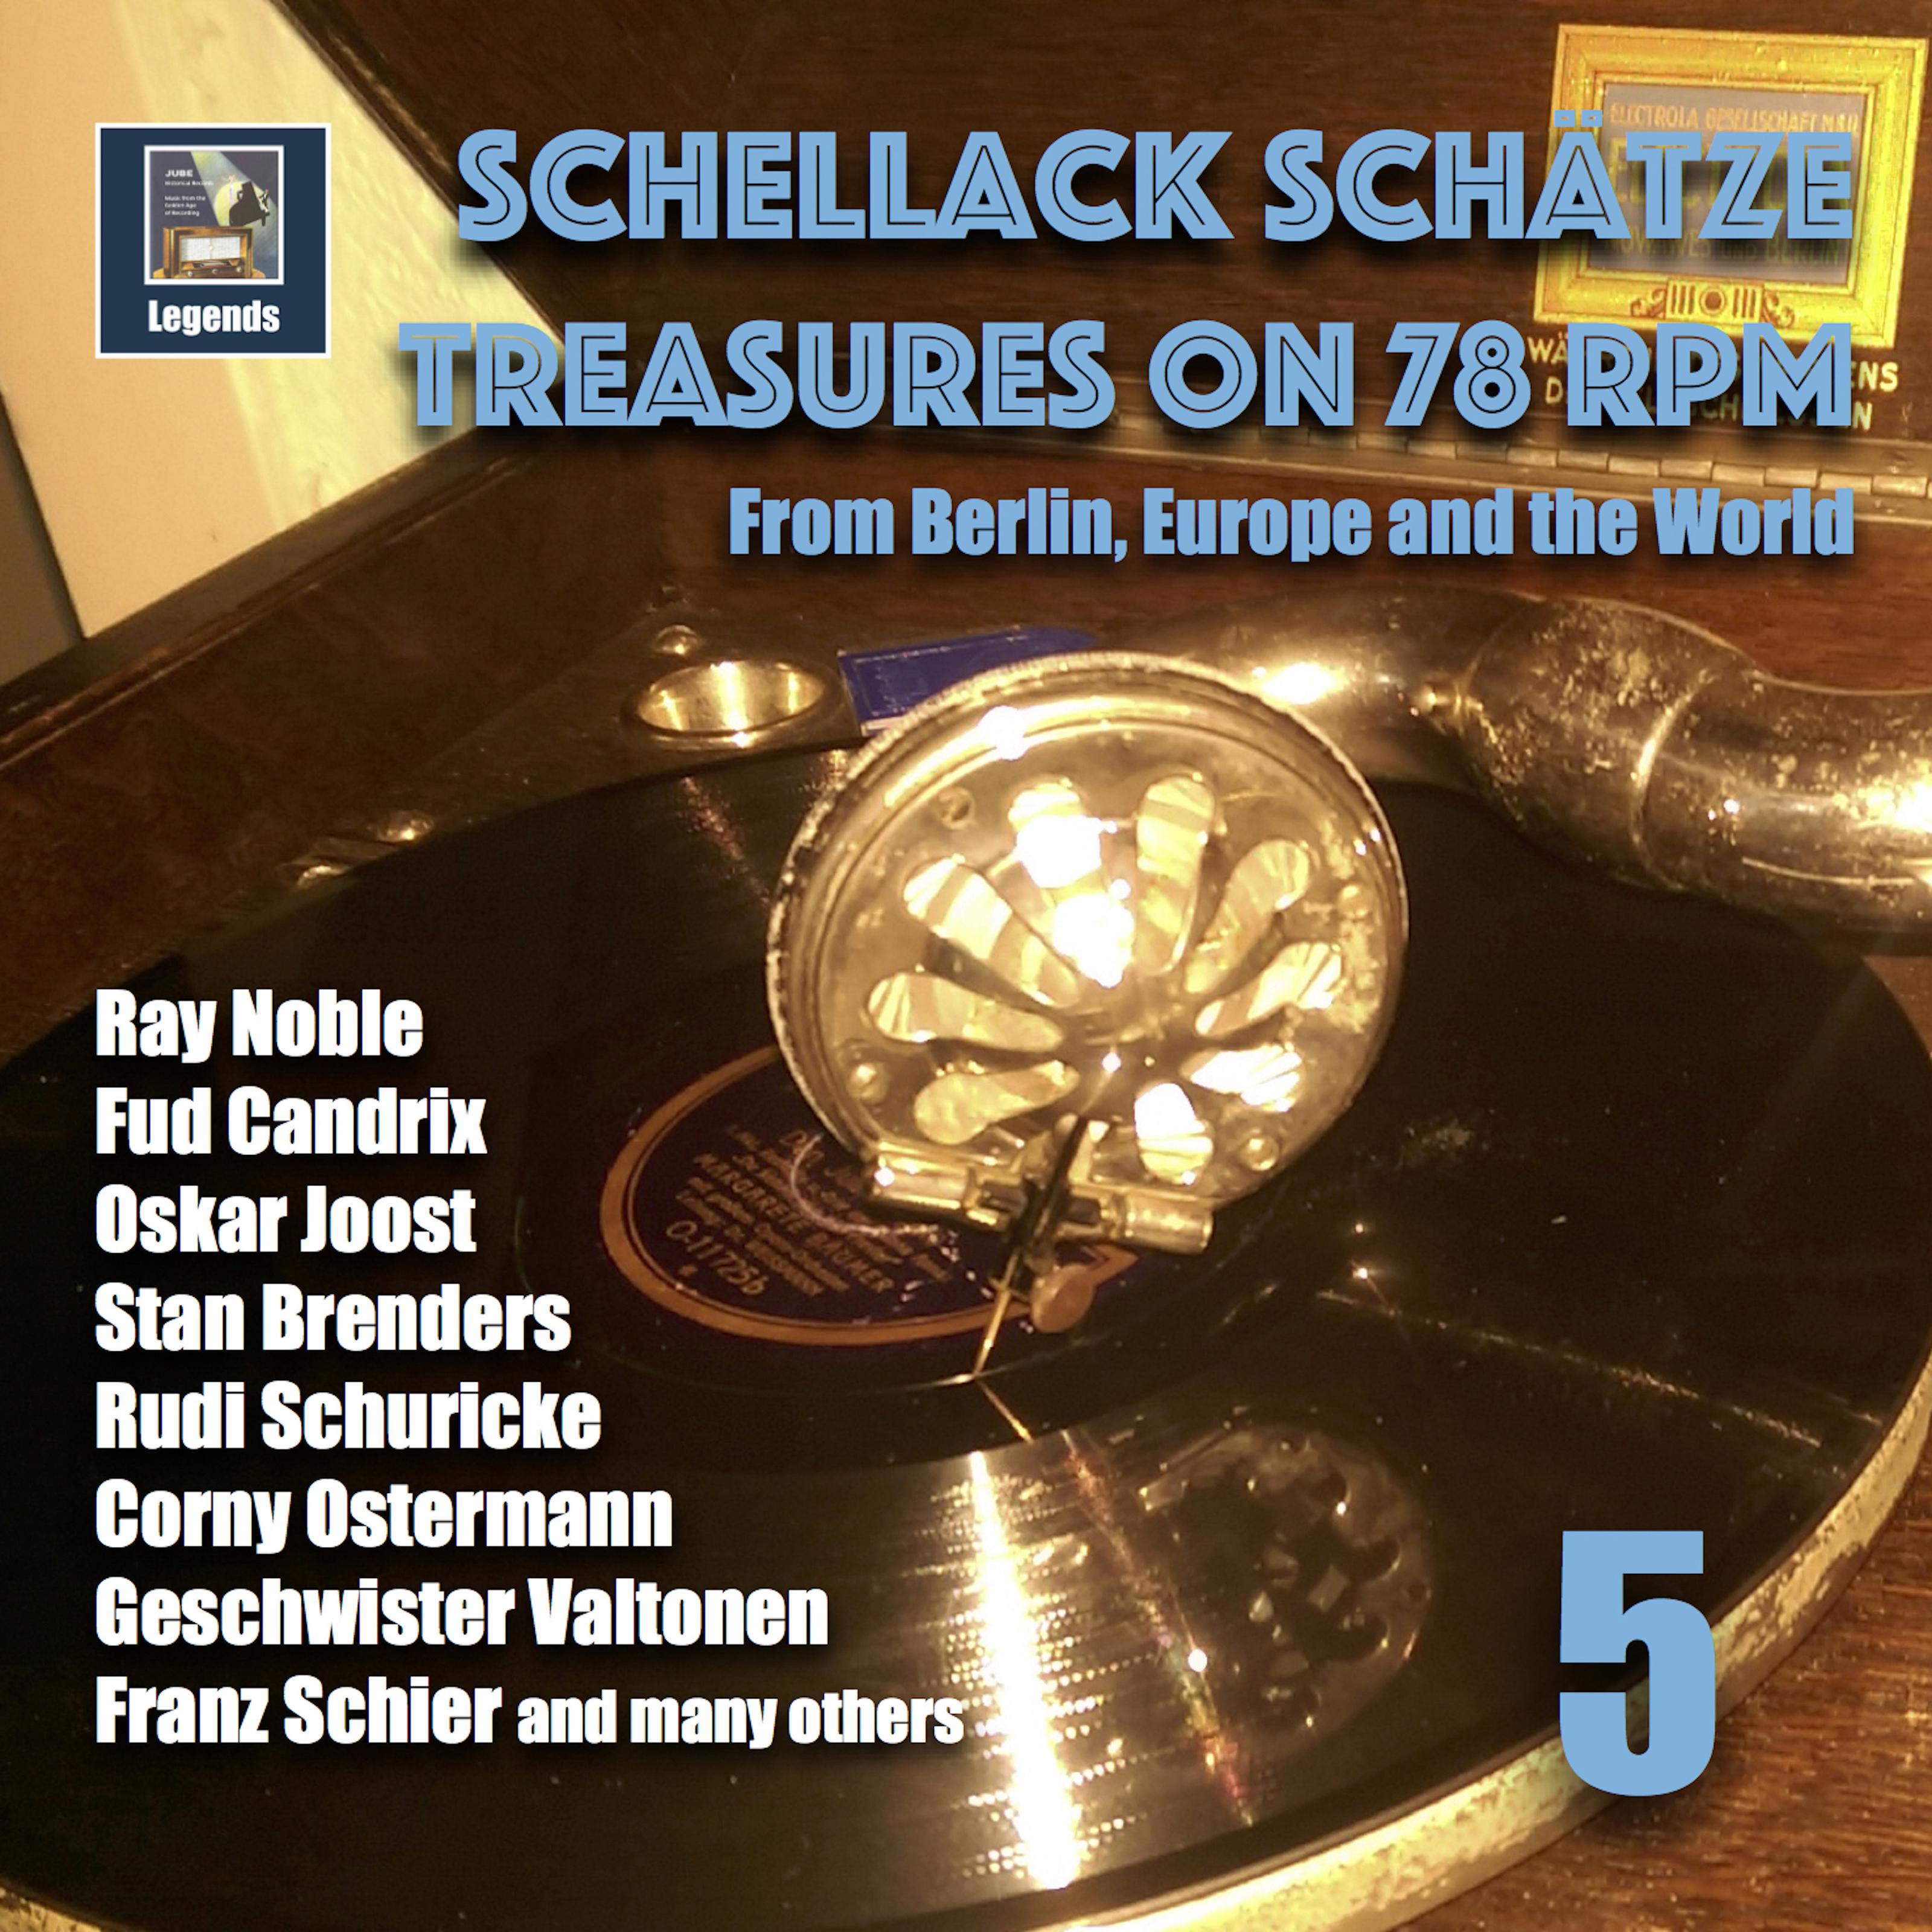 Schellack Sch tze: Treasures on 78 RPM from Berlin, Europe and the World, Vol. 5